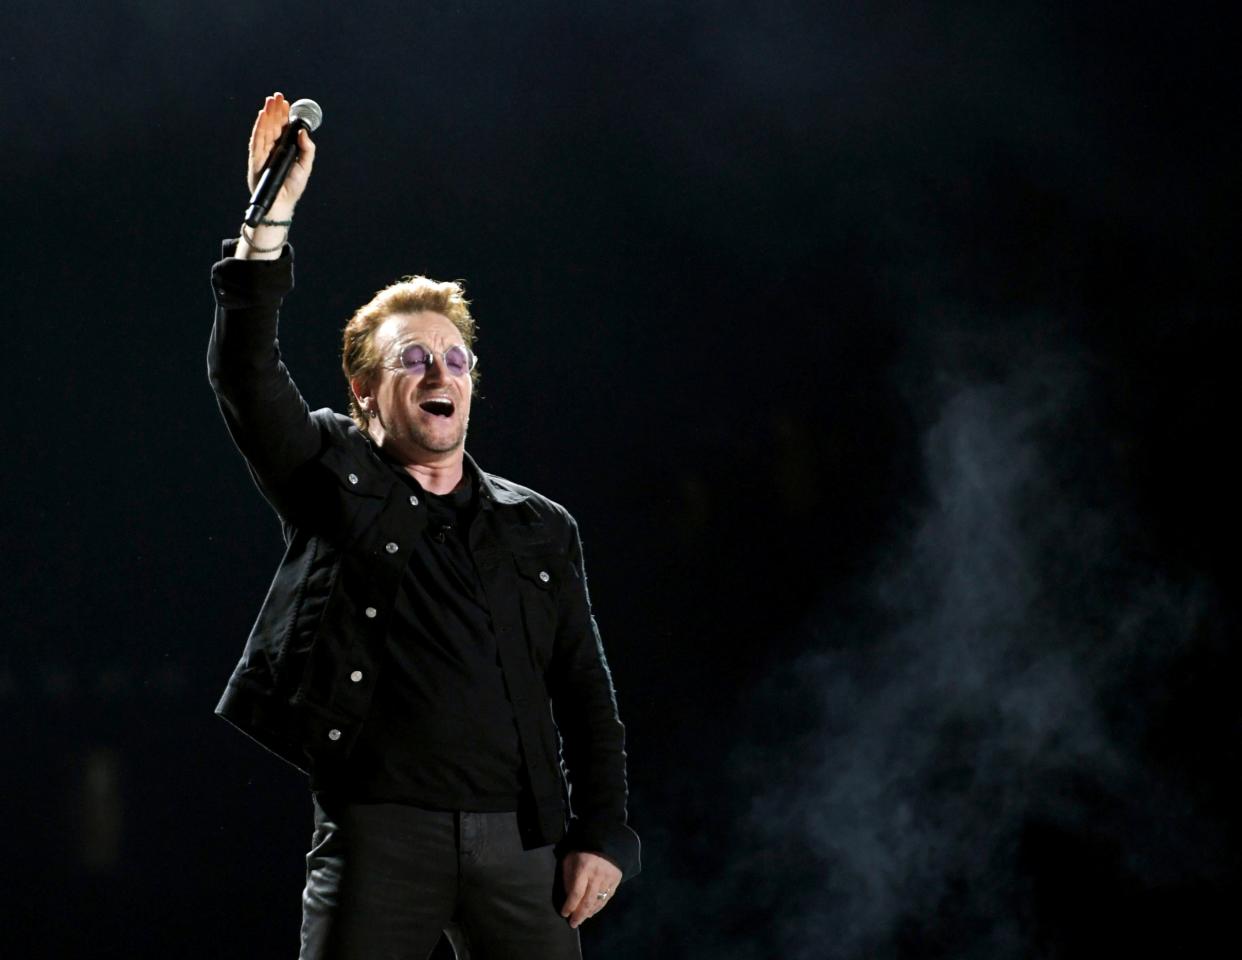 U2's Bono performs on the What Stage as the headlining performance at Bonnaroo in Manchester, Tenn., on June 9, 2017.